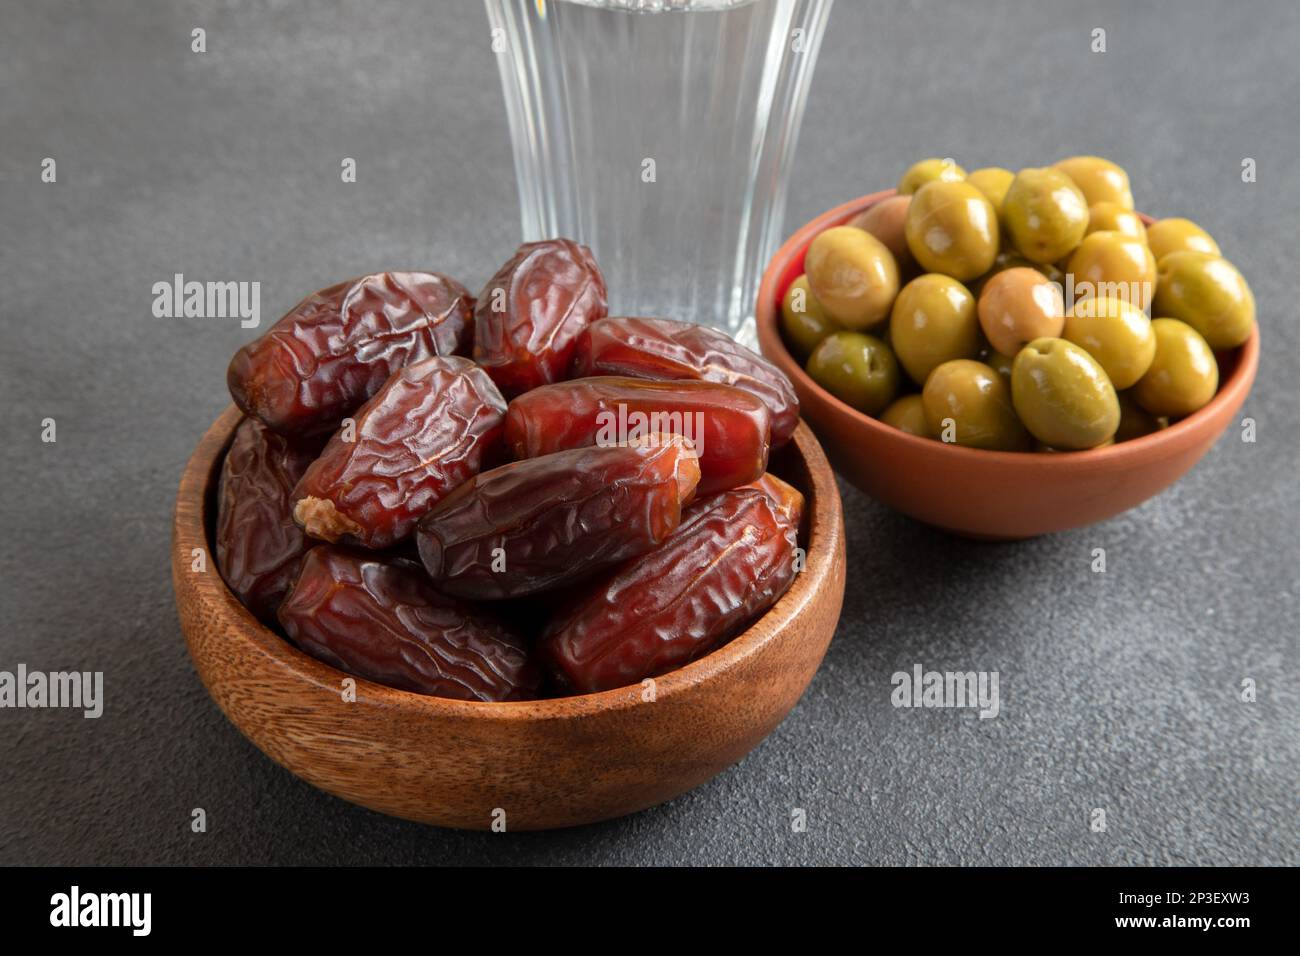 Date fruit, olives and a glass of water on black background Stock Photo